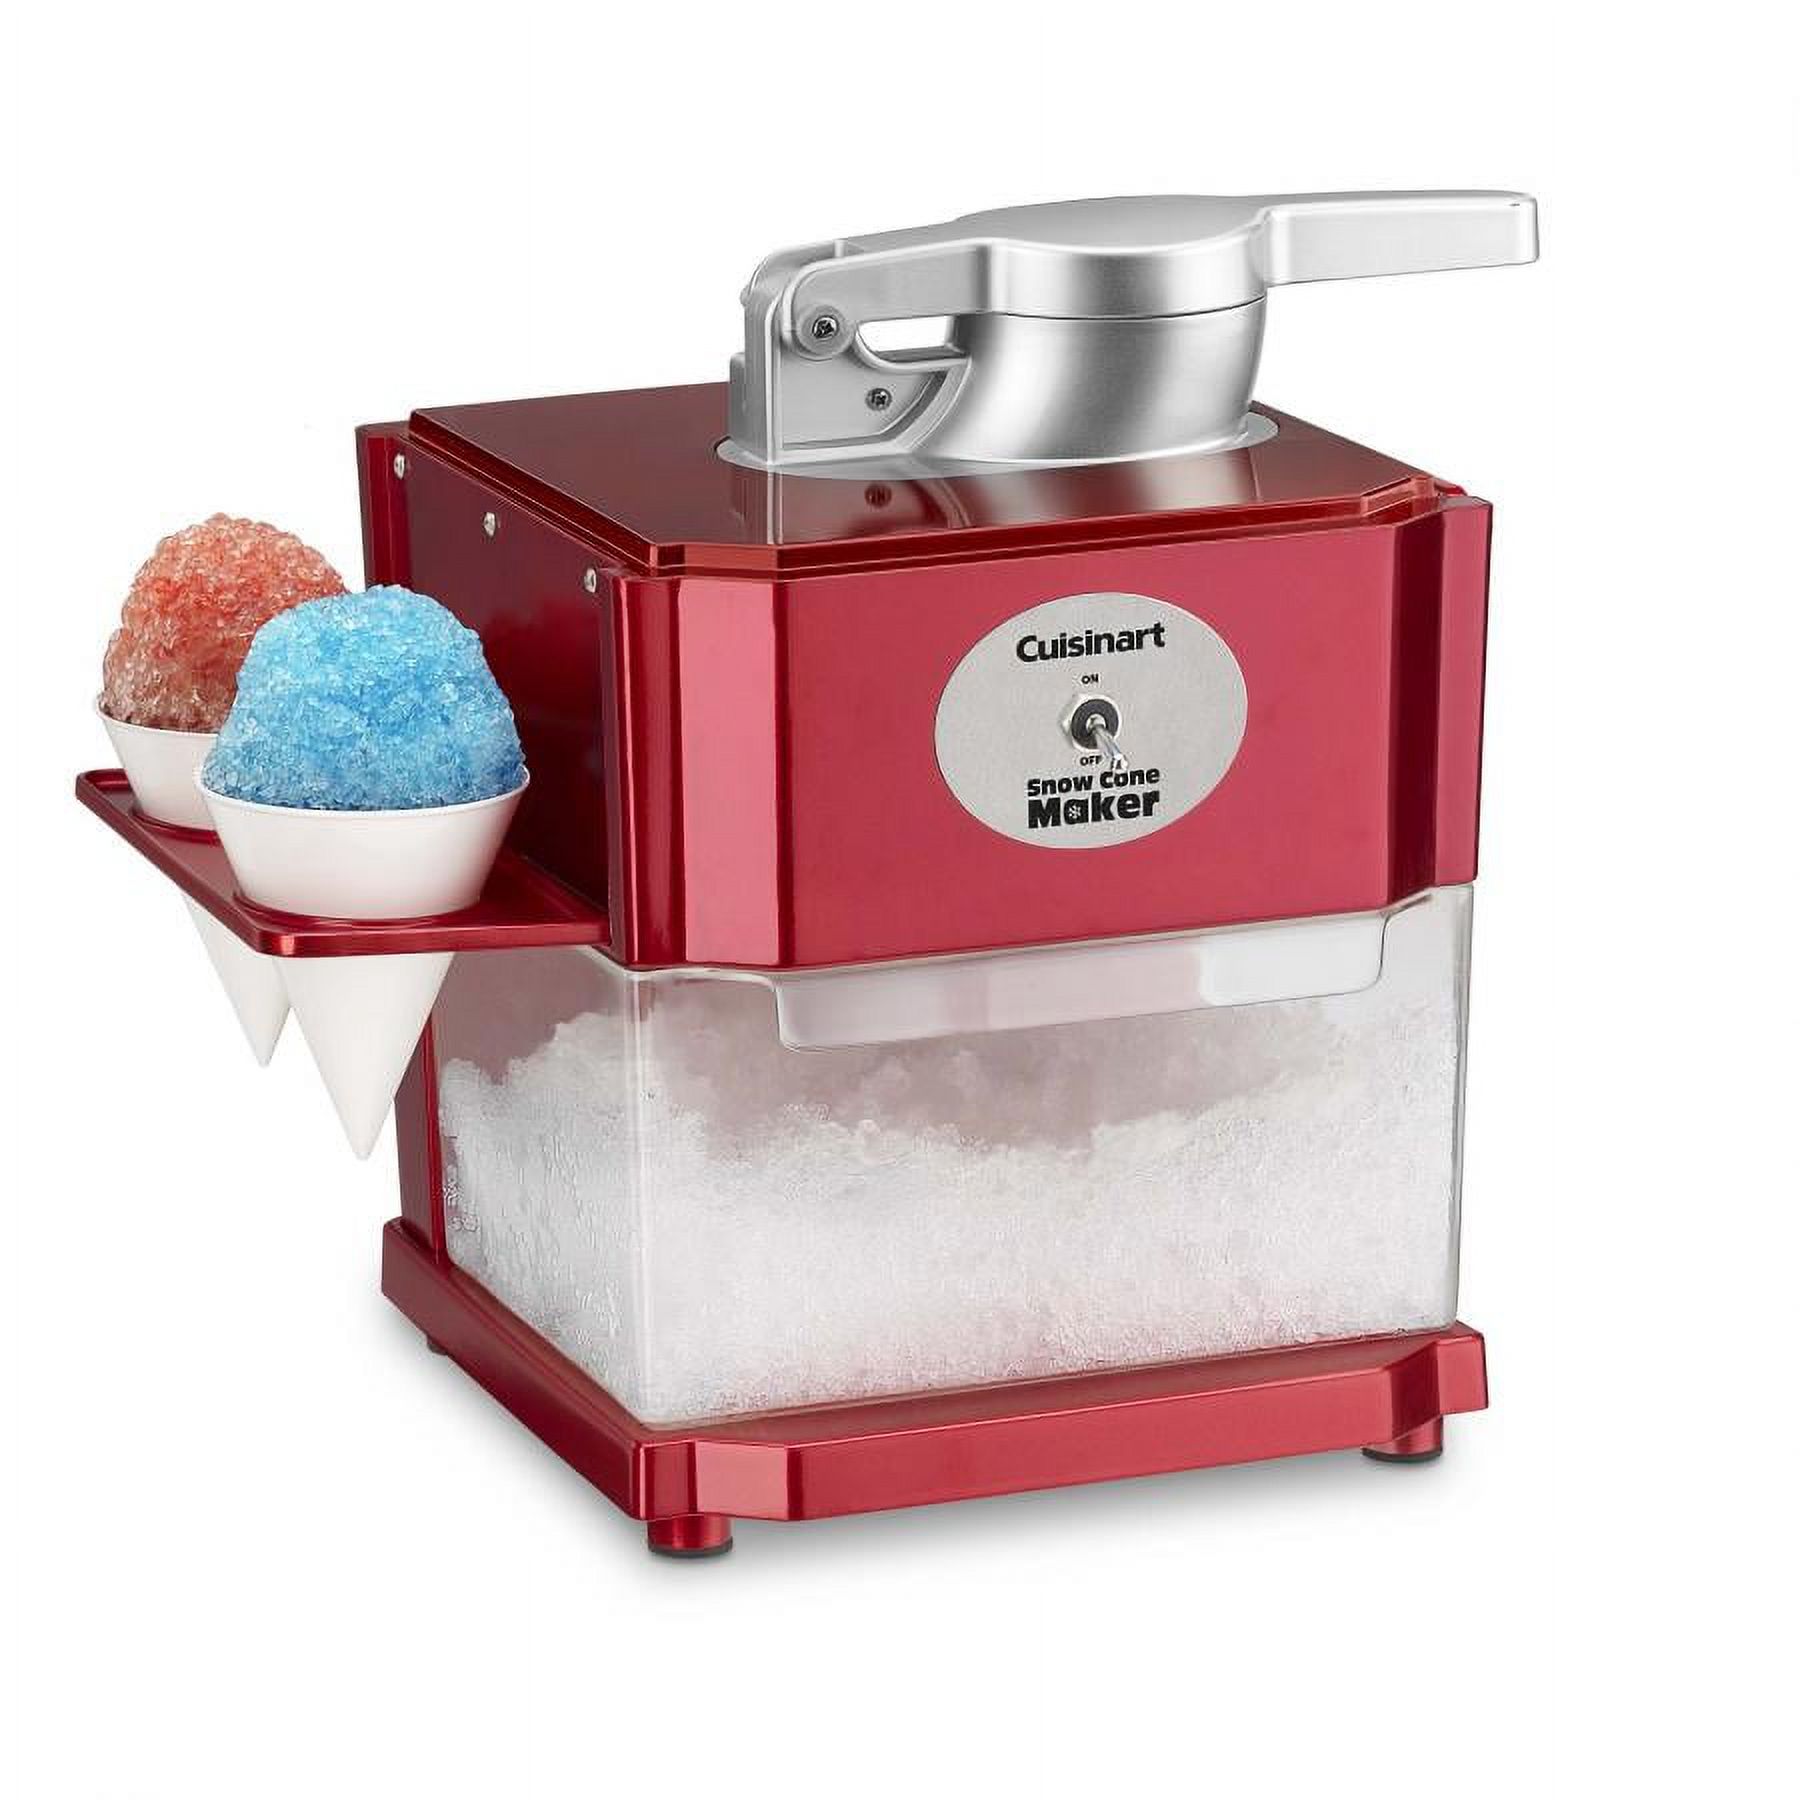 Cuisinart Specialty Appliances Snow Cone Maker - image 1 of 2